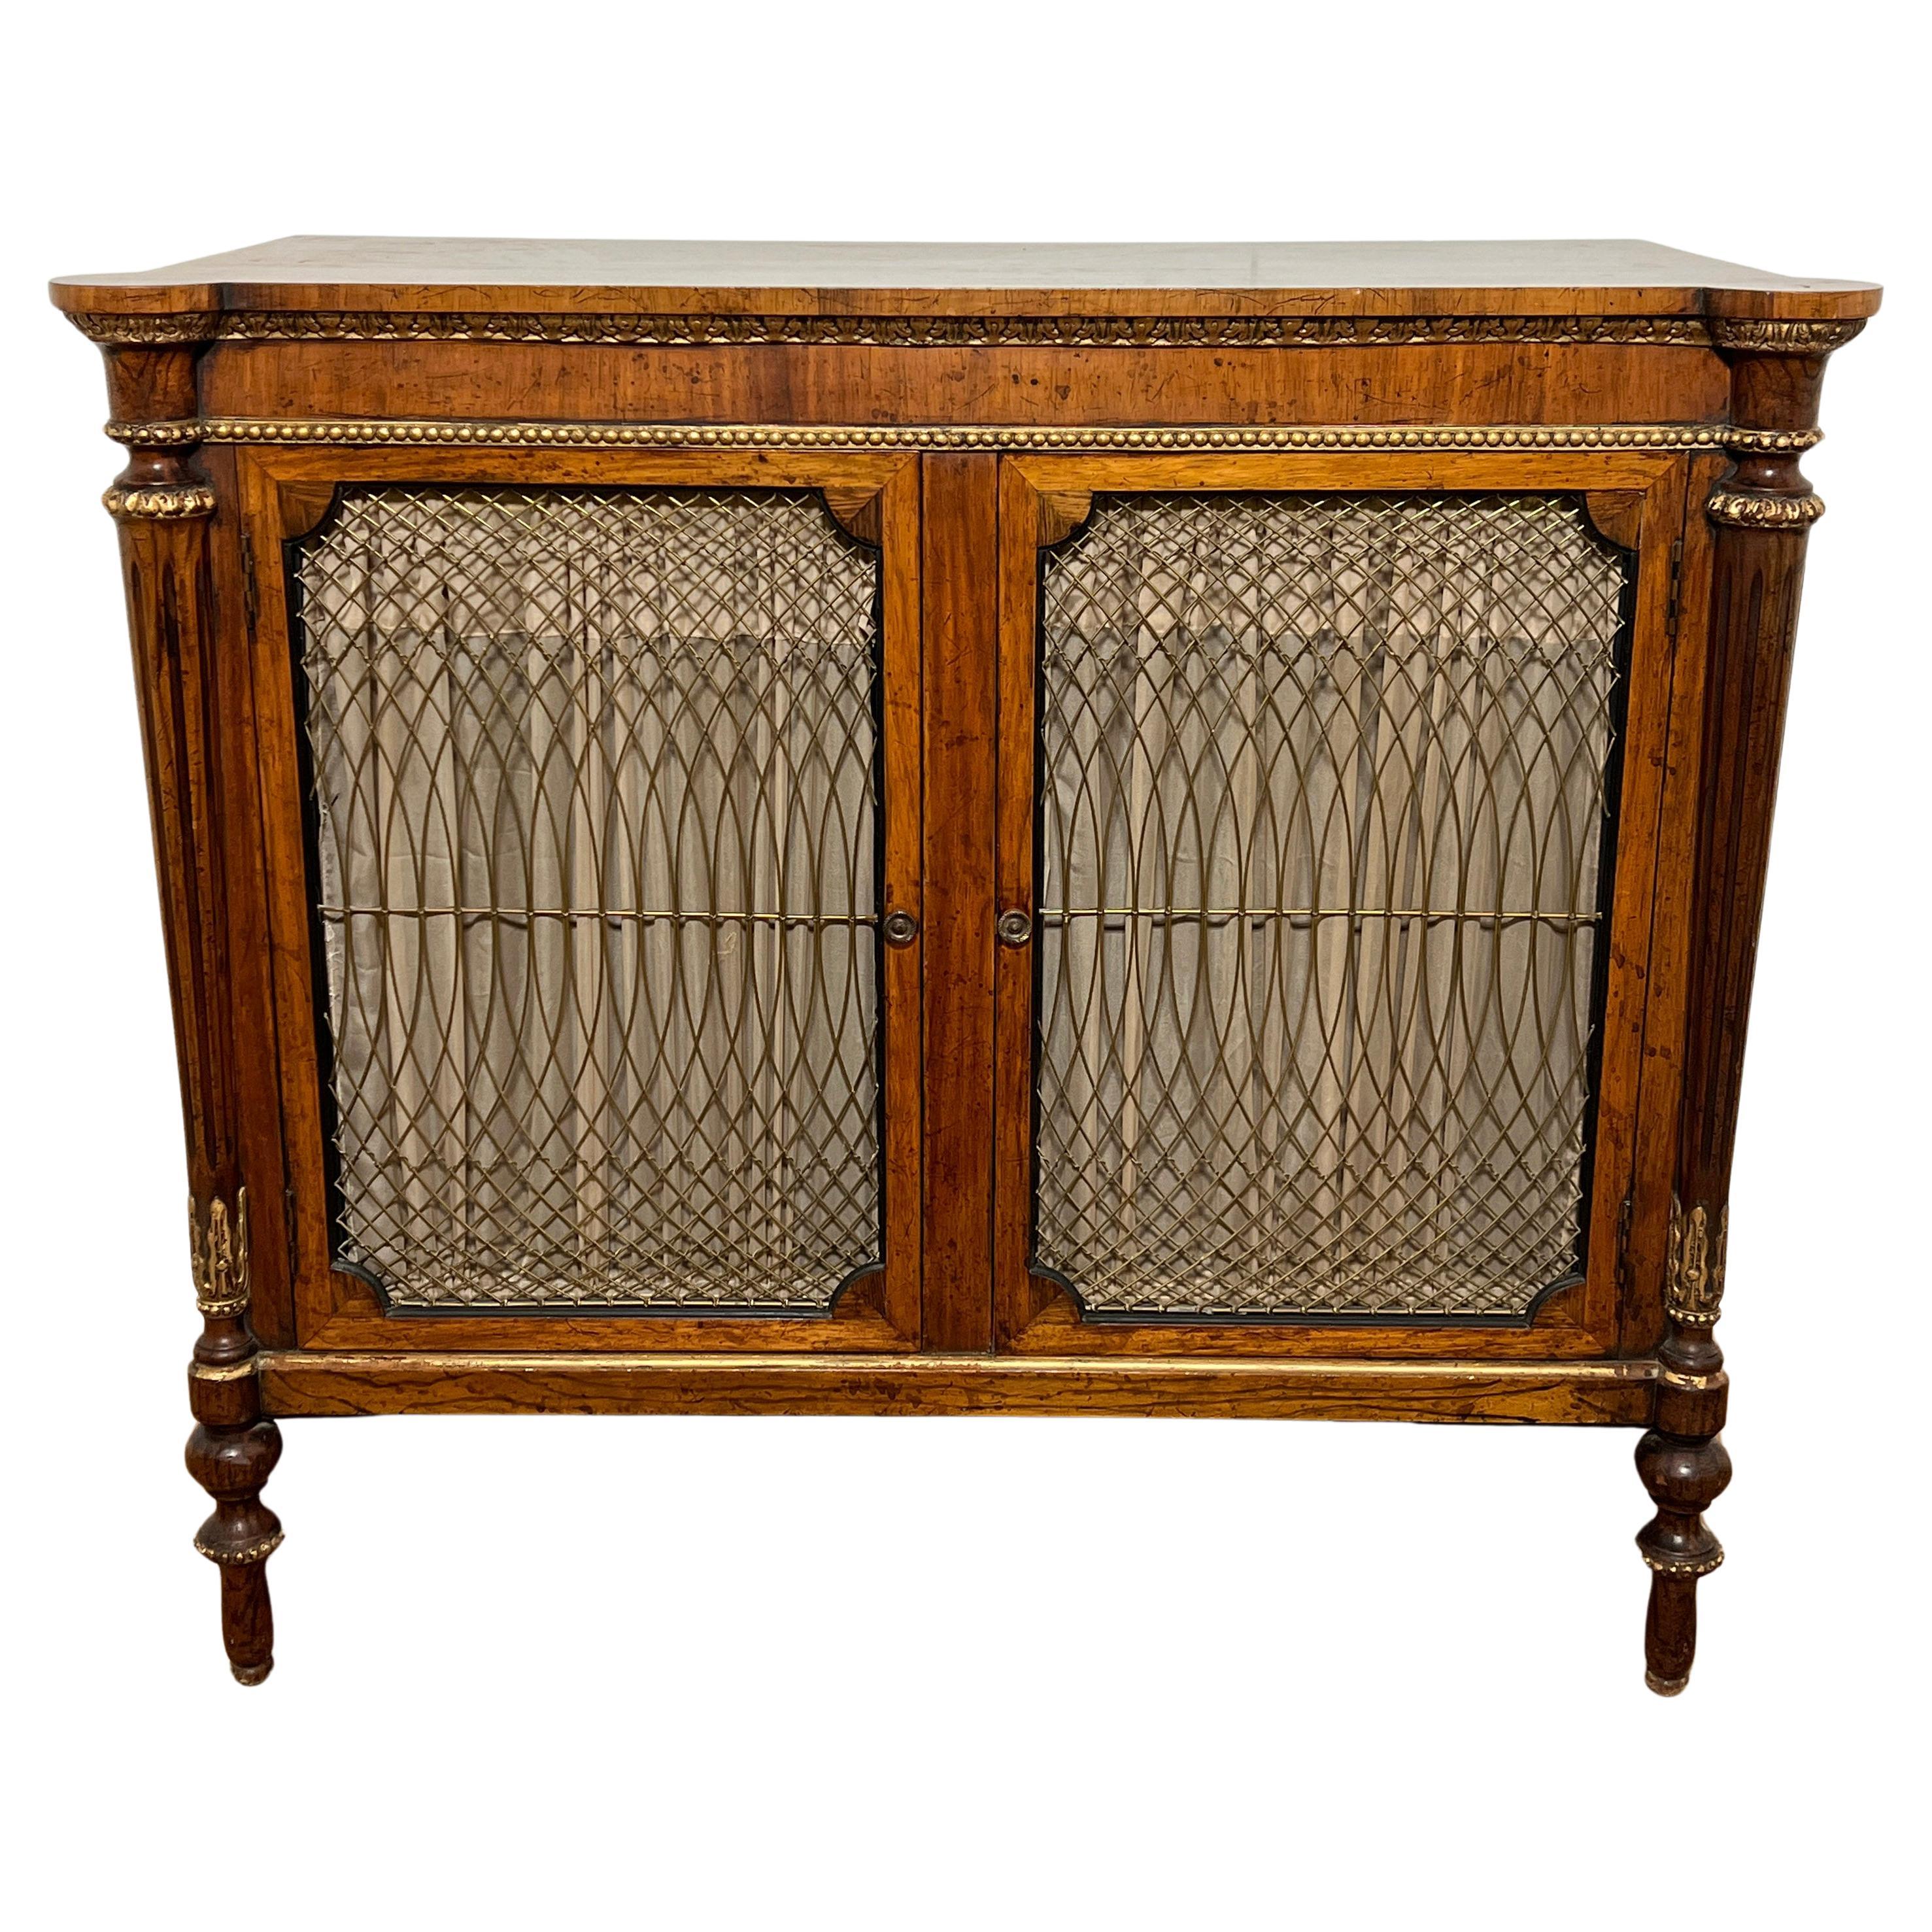 Early 19th Century English Regency Grill Front Rosewood Credenza For Sale